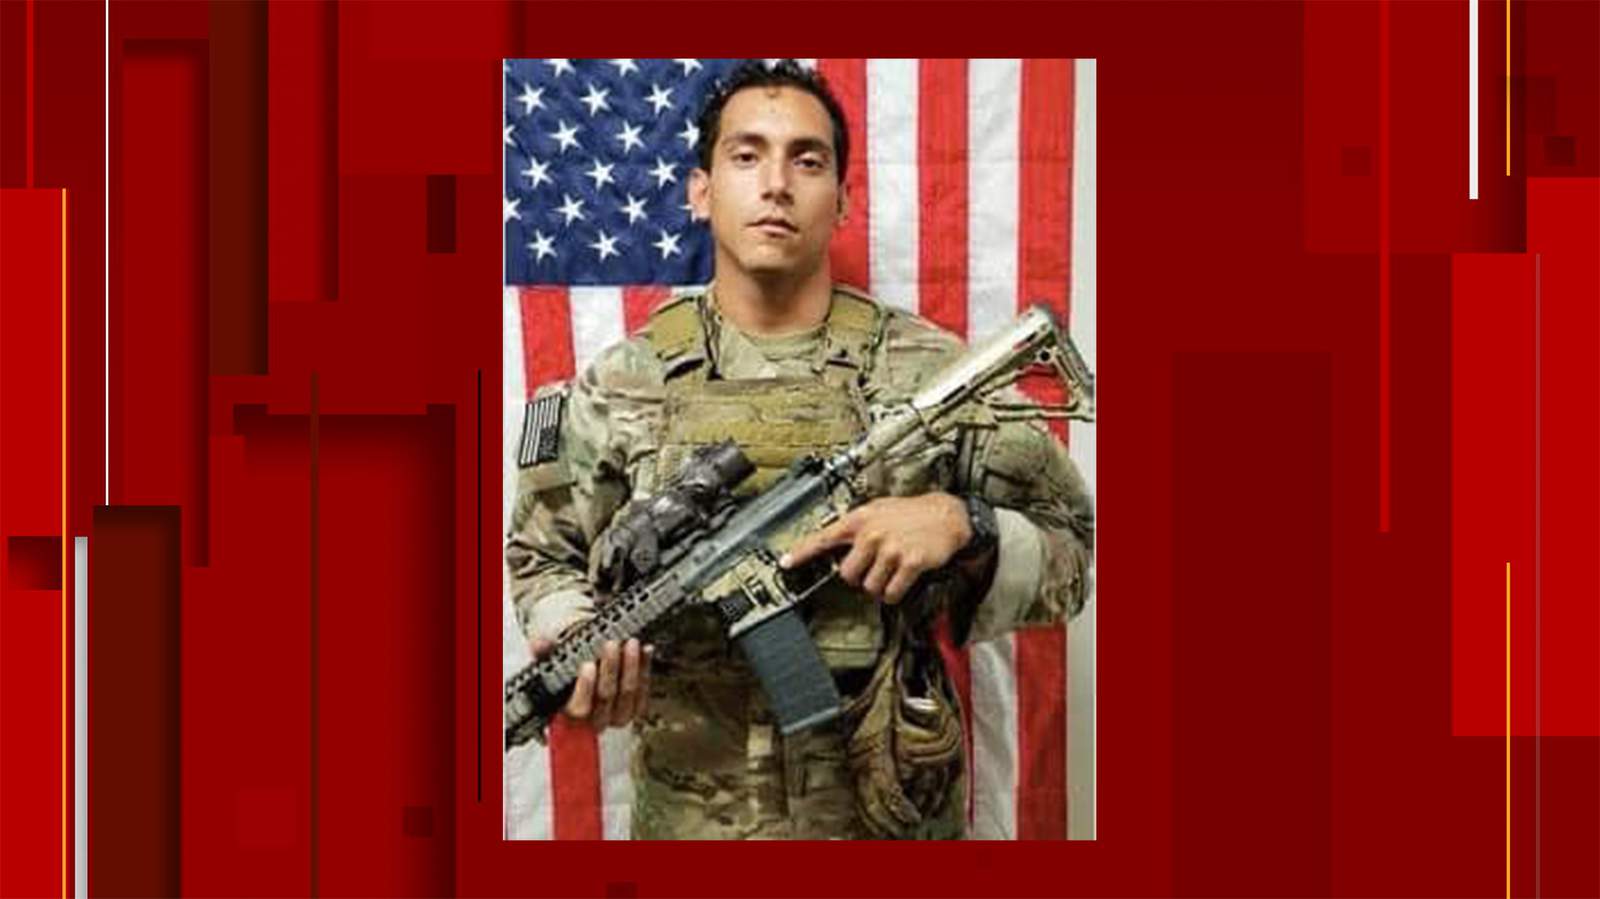 San Antonio man, 28, died during training incident at Army Ranger School in Florida, officials say